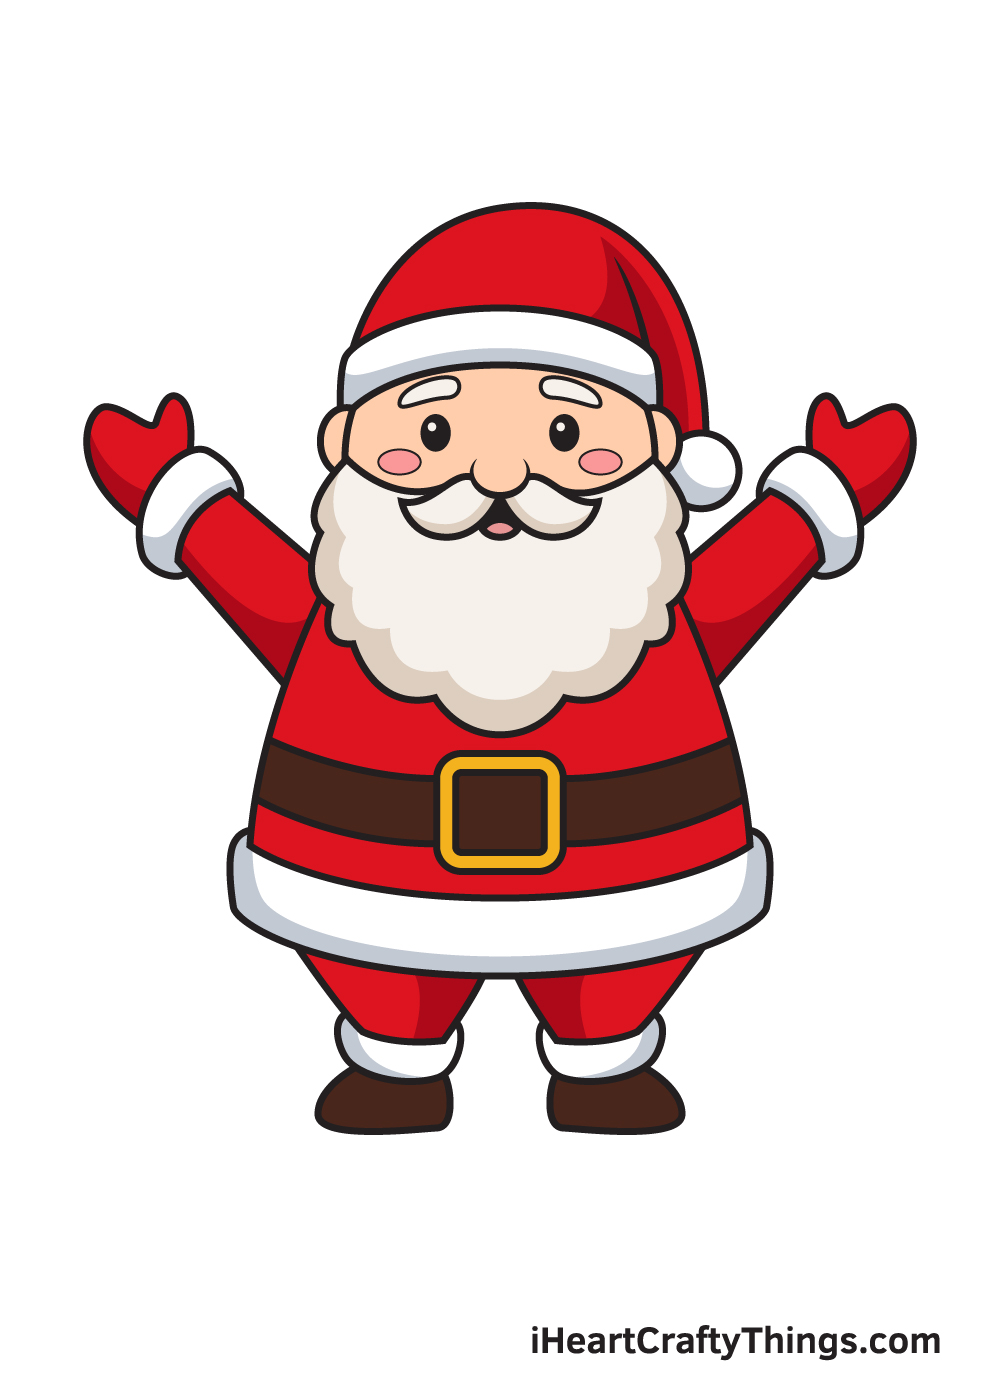 Santa Claus Drawing — How To Draw Santa Claus Step By Step